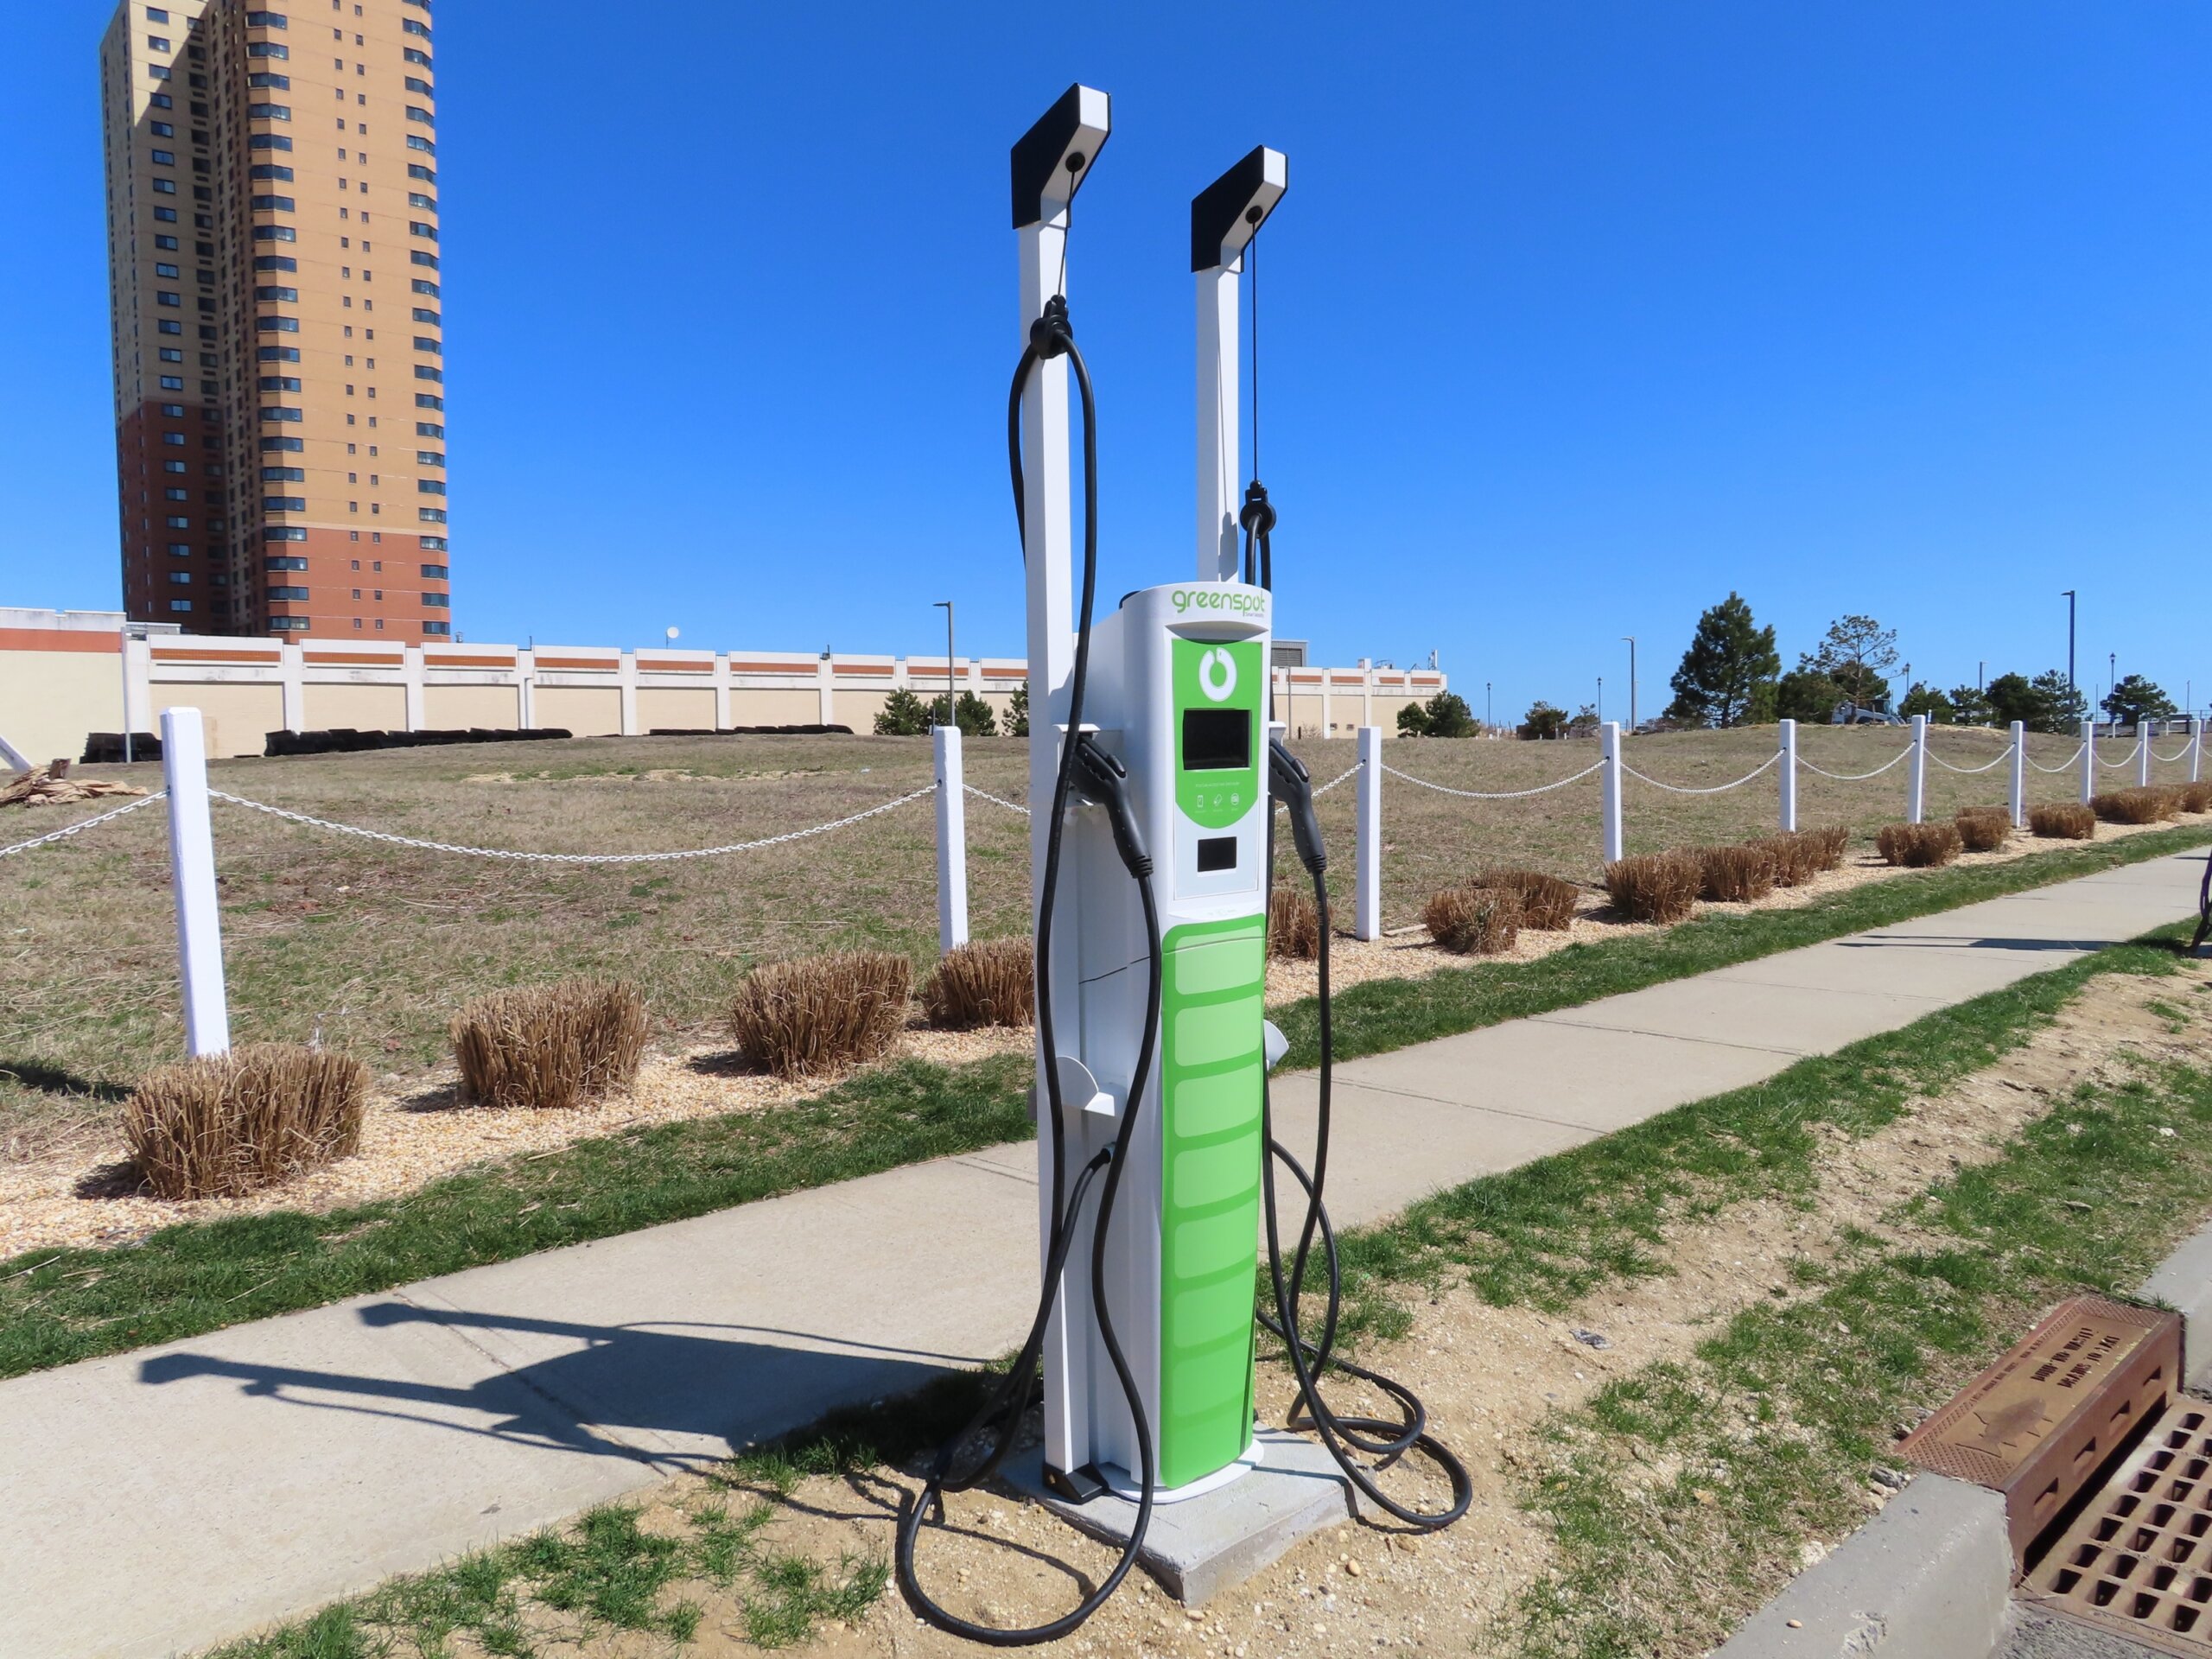 as-gas-prices-rise-towns-add-electric-car-charging-stations-wtop-news